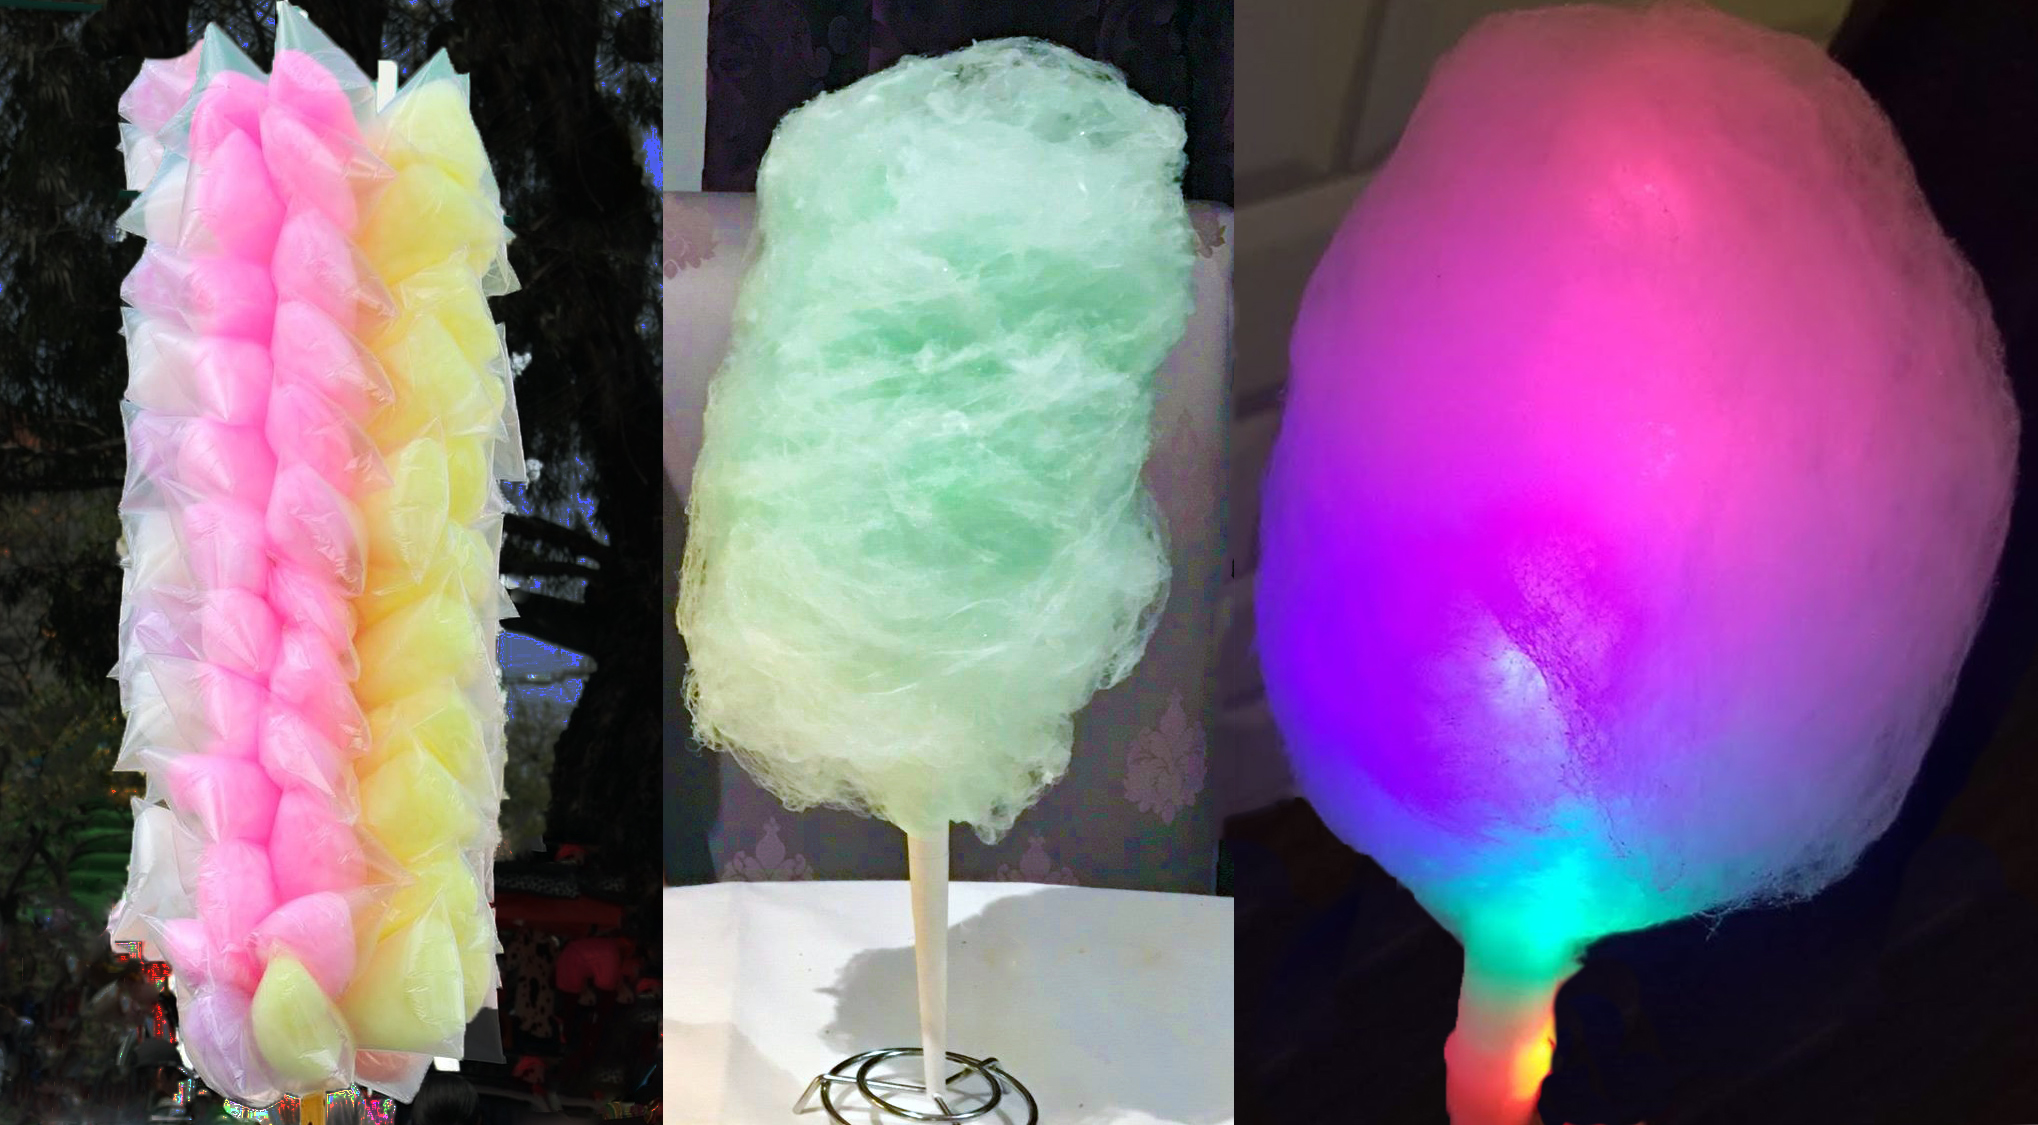 George Bernard Symposium udsagnsord Cotton Candy: a traditional sugary treat gets a new spin - Glutto Digest